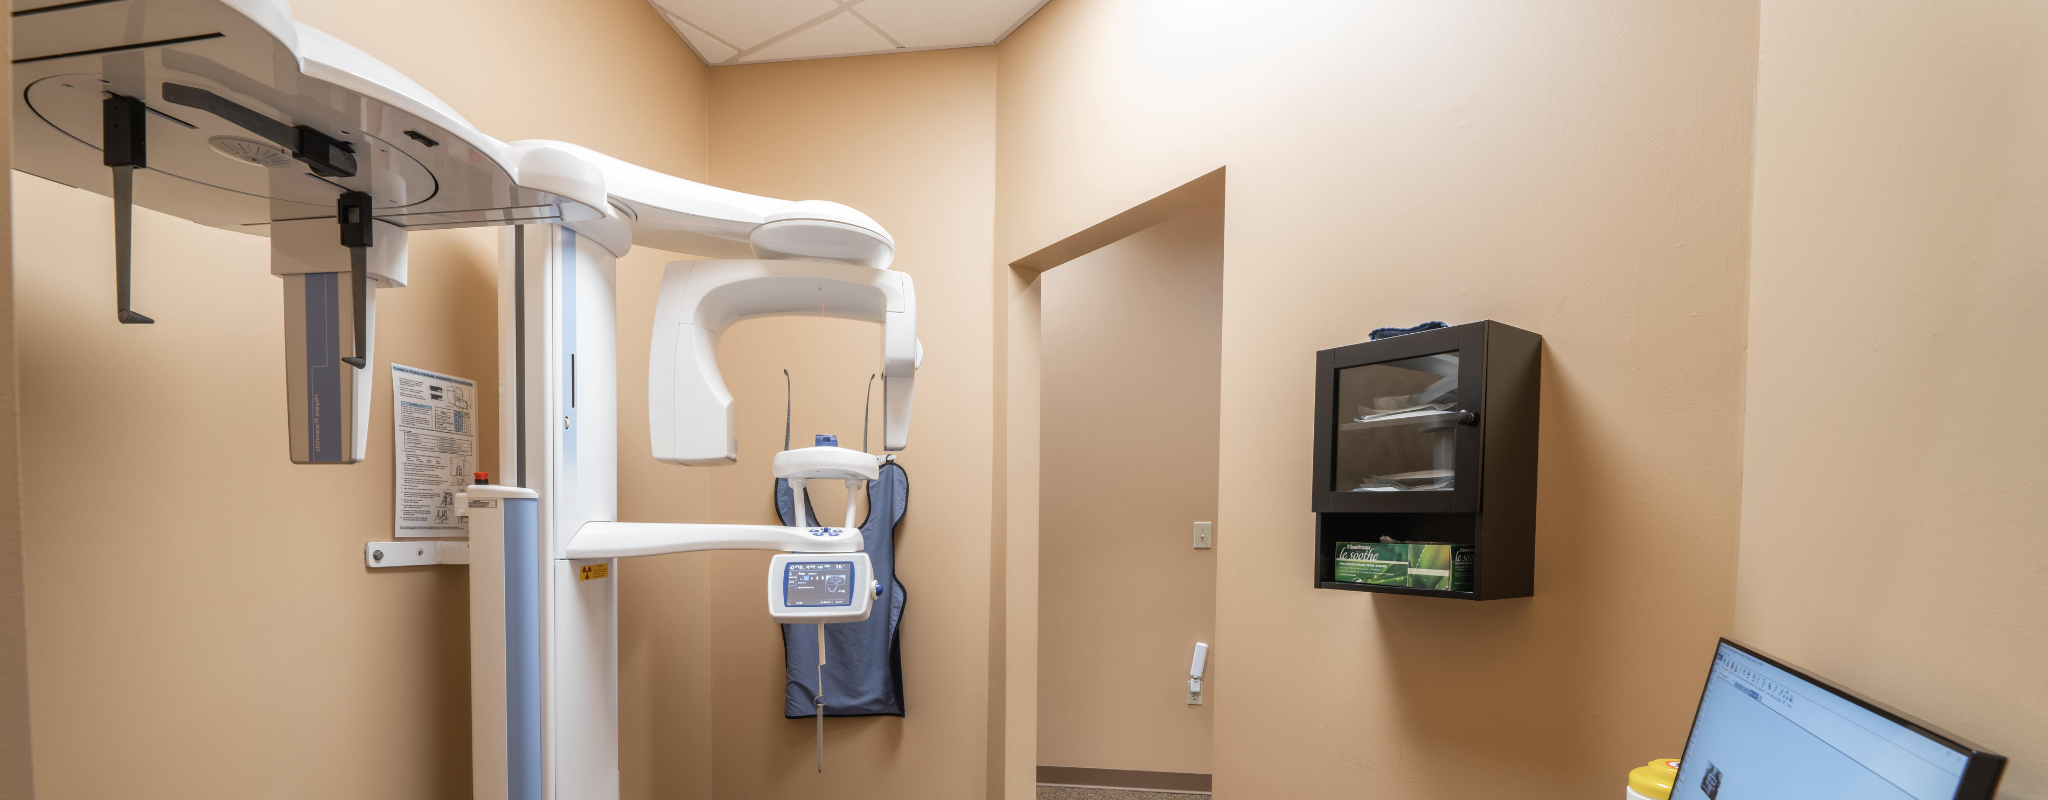 dental x-ray machine for st. pete orthodontists